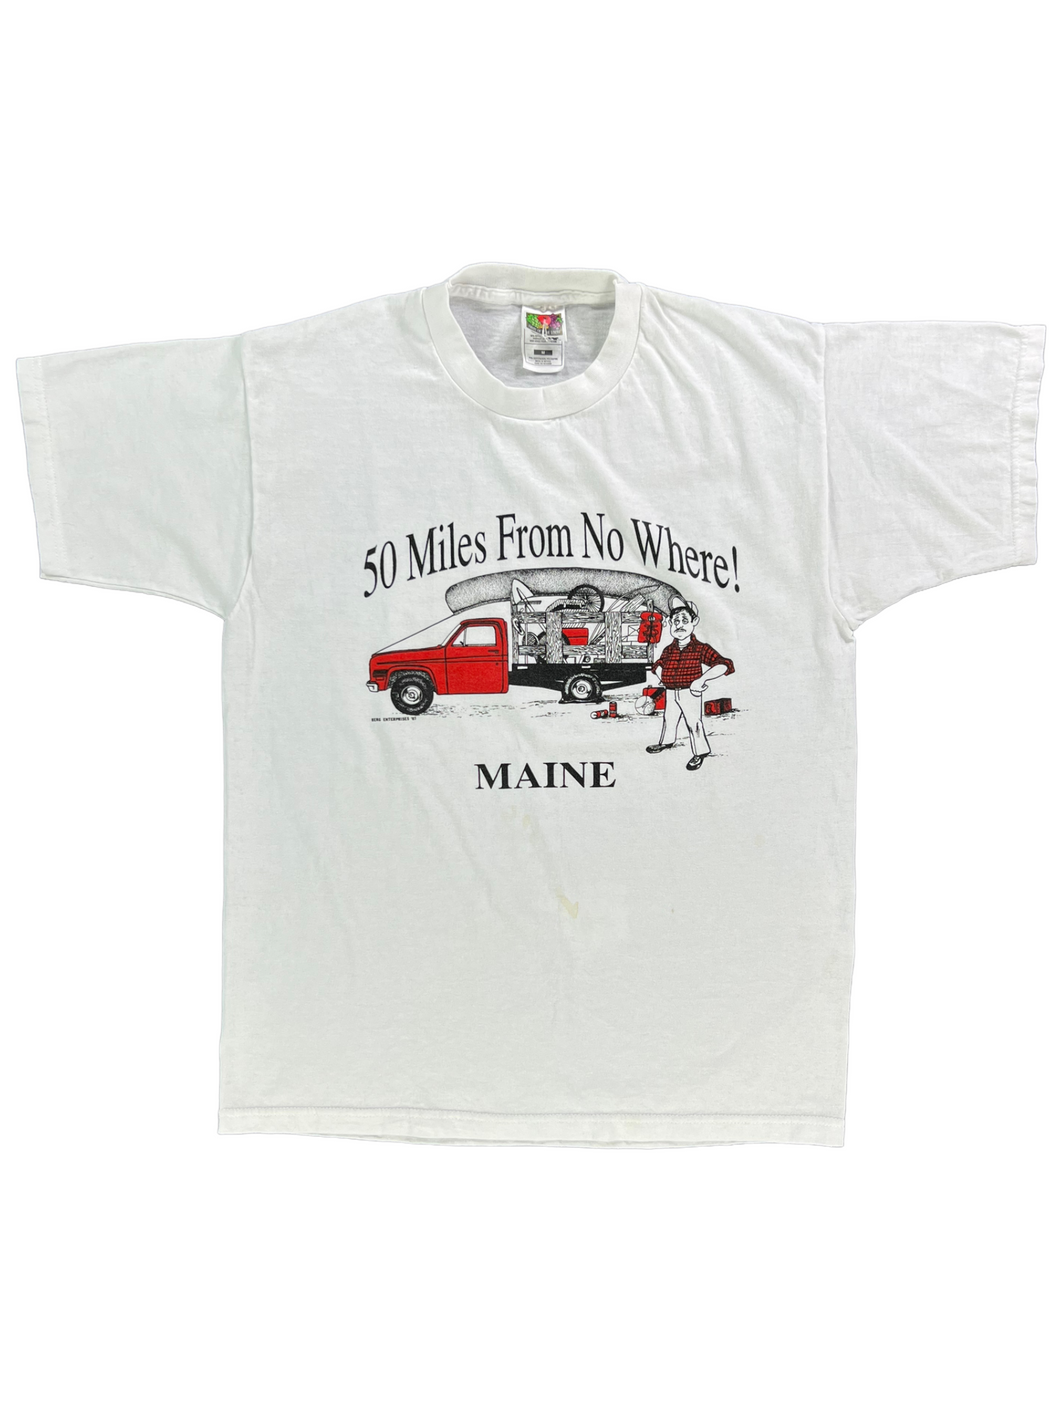 Vintage 90s Maine 50 miles from no where! graphic tee (M)